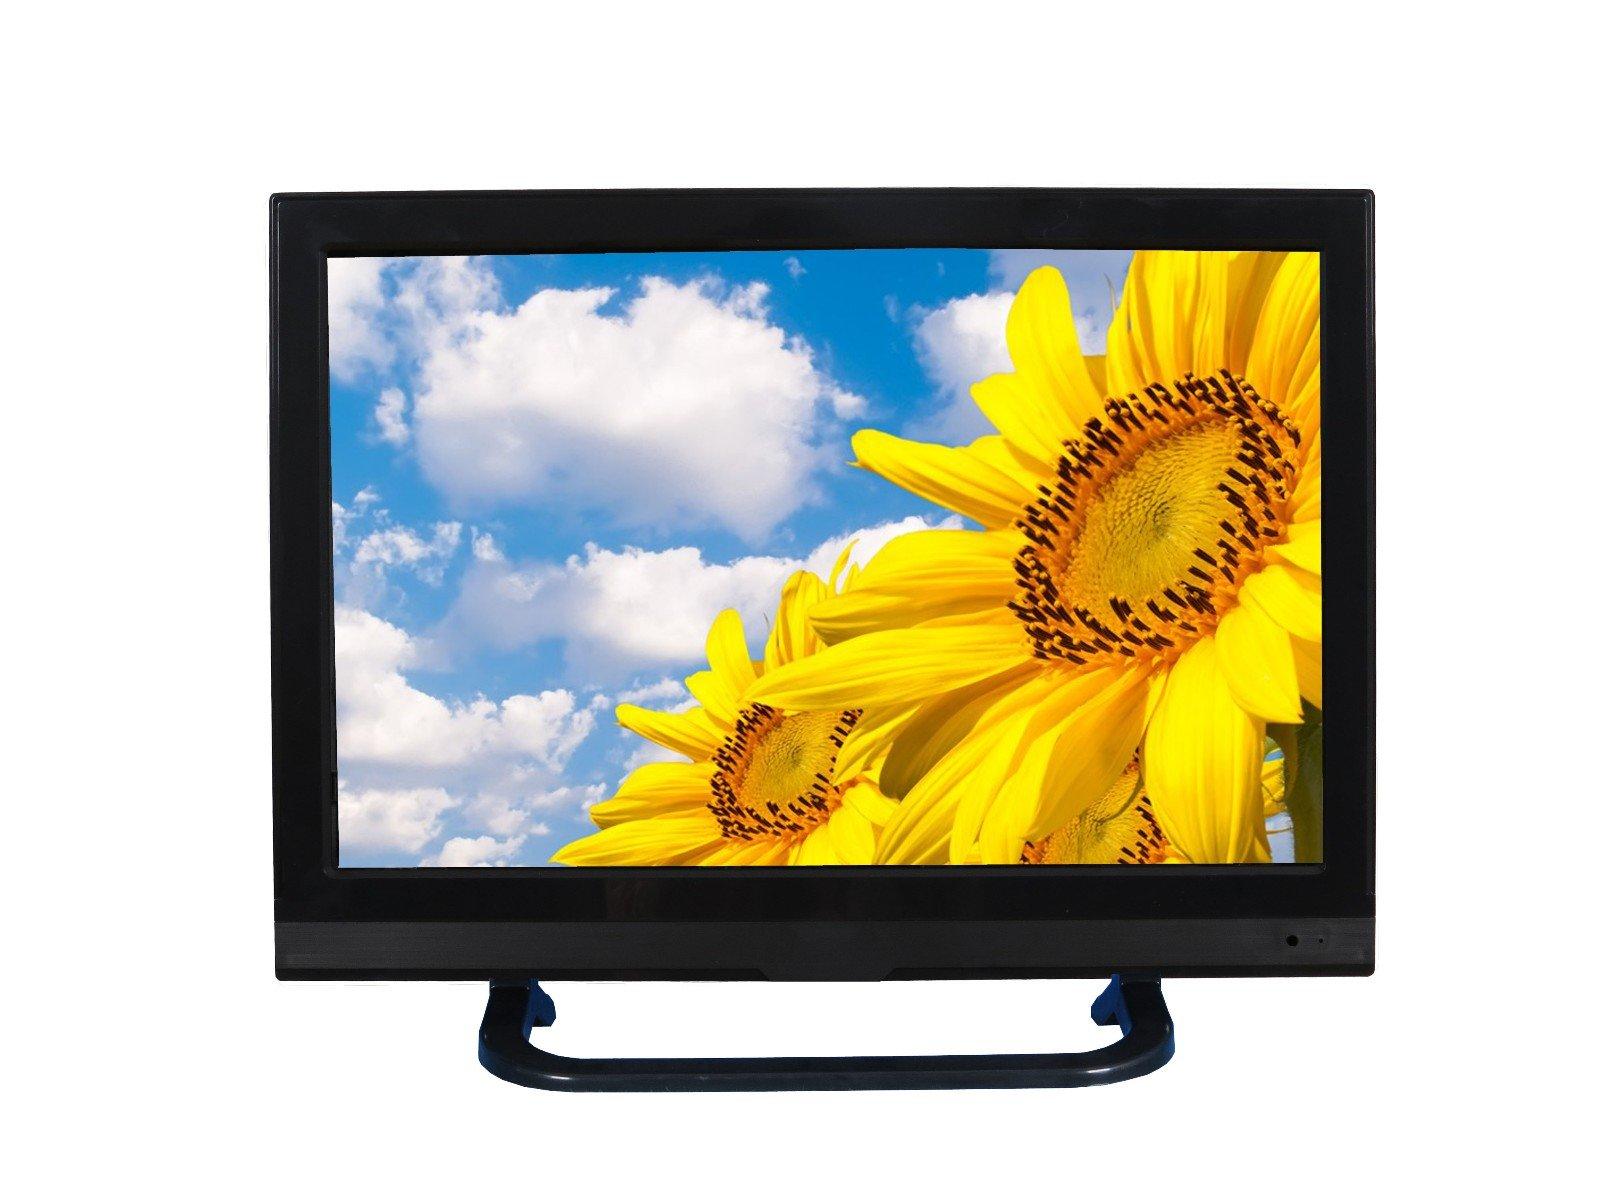 Xinyao LCD bulk 20 inch tv price manufacturer for lcd screen